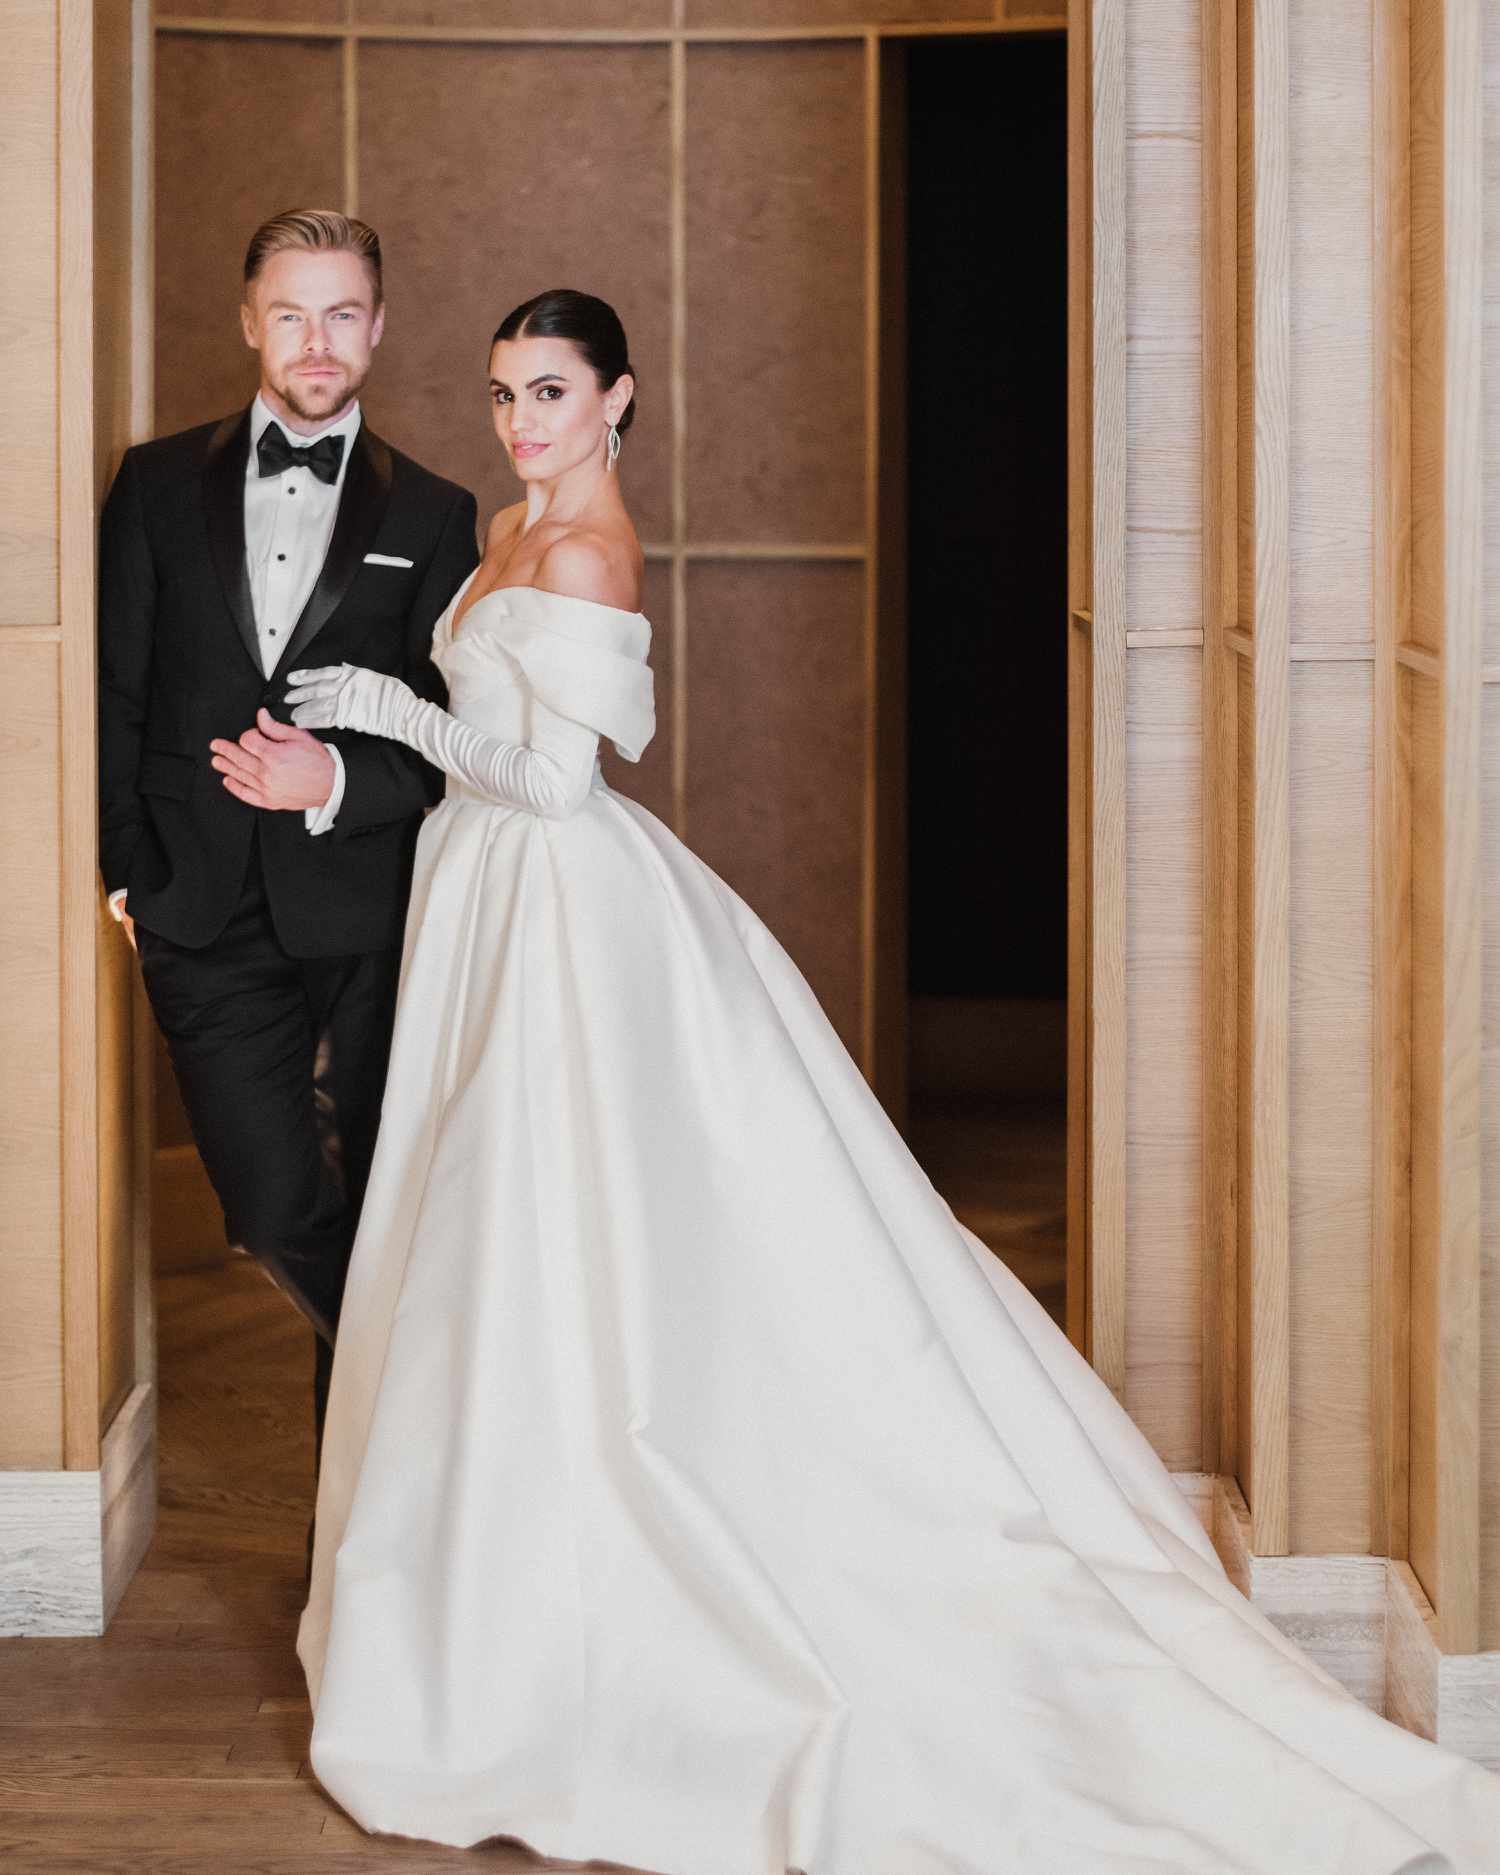 The Wedding Planning Issue featuring Derek Hough and Hayley Erbert - cover